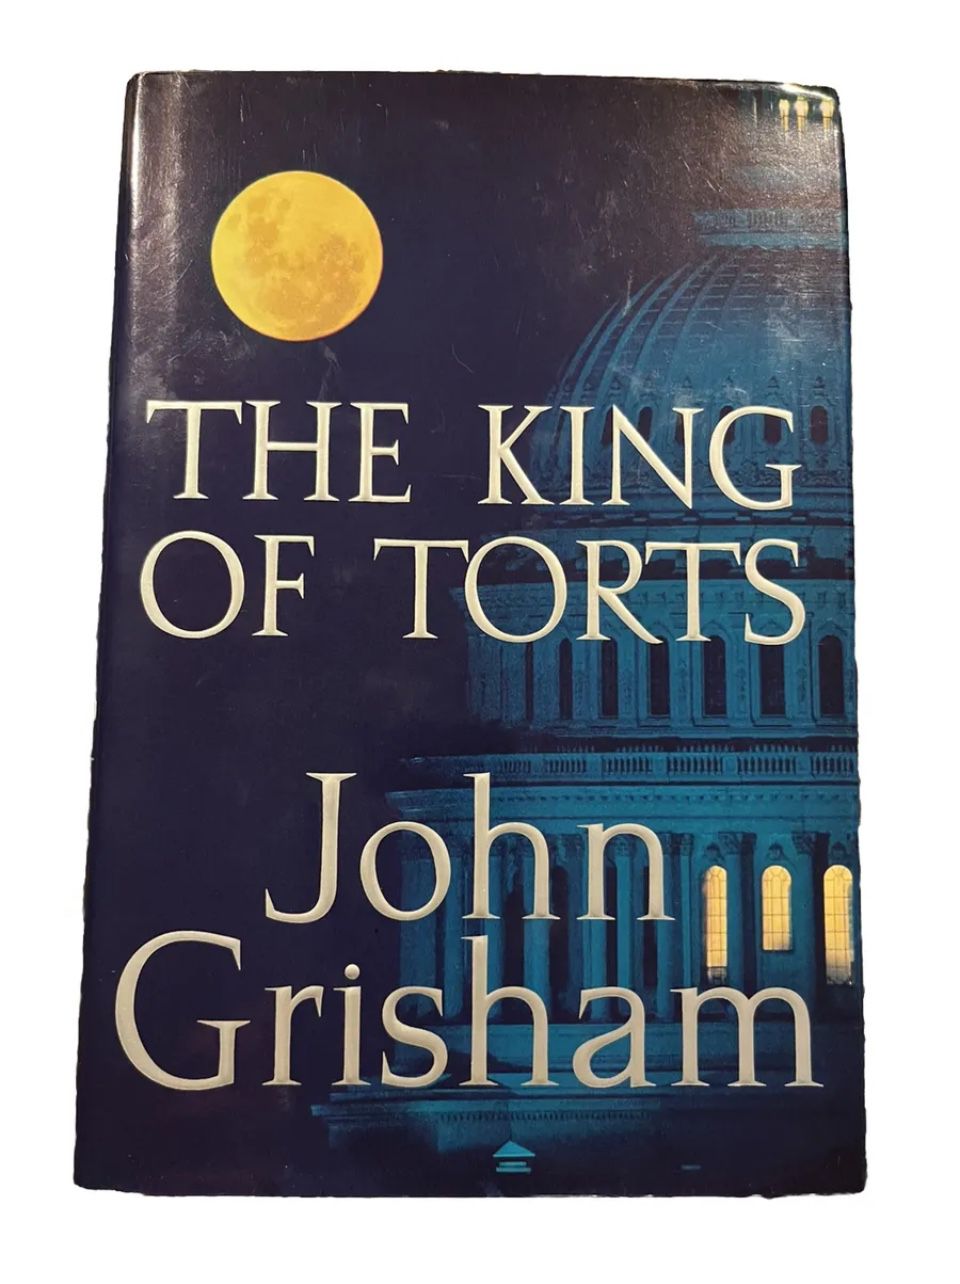 The King of Torts : A Novel by John Grisham 2003 1st Edition Hardcover